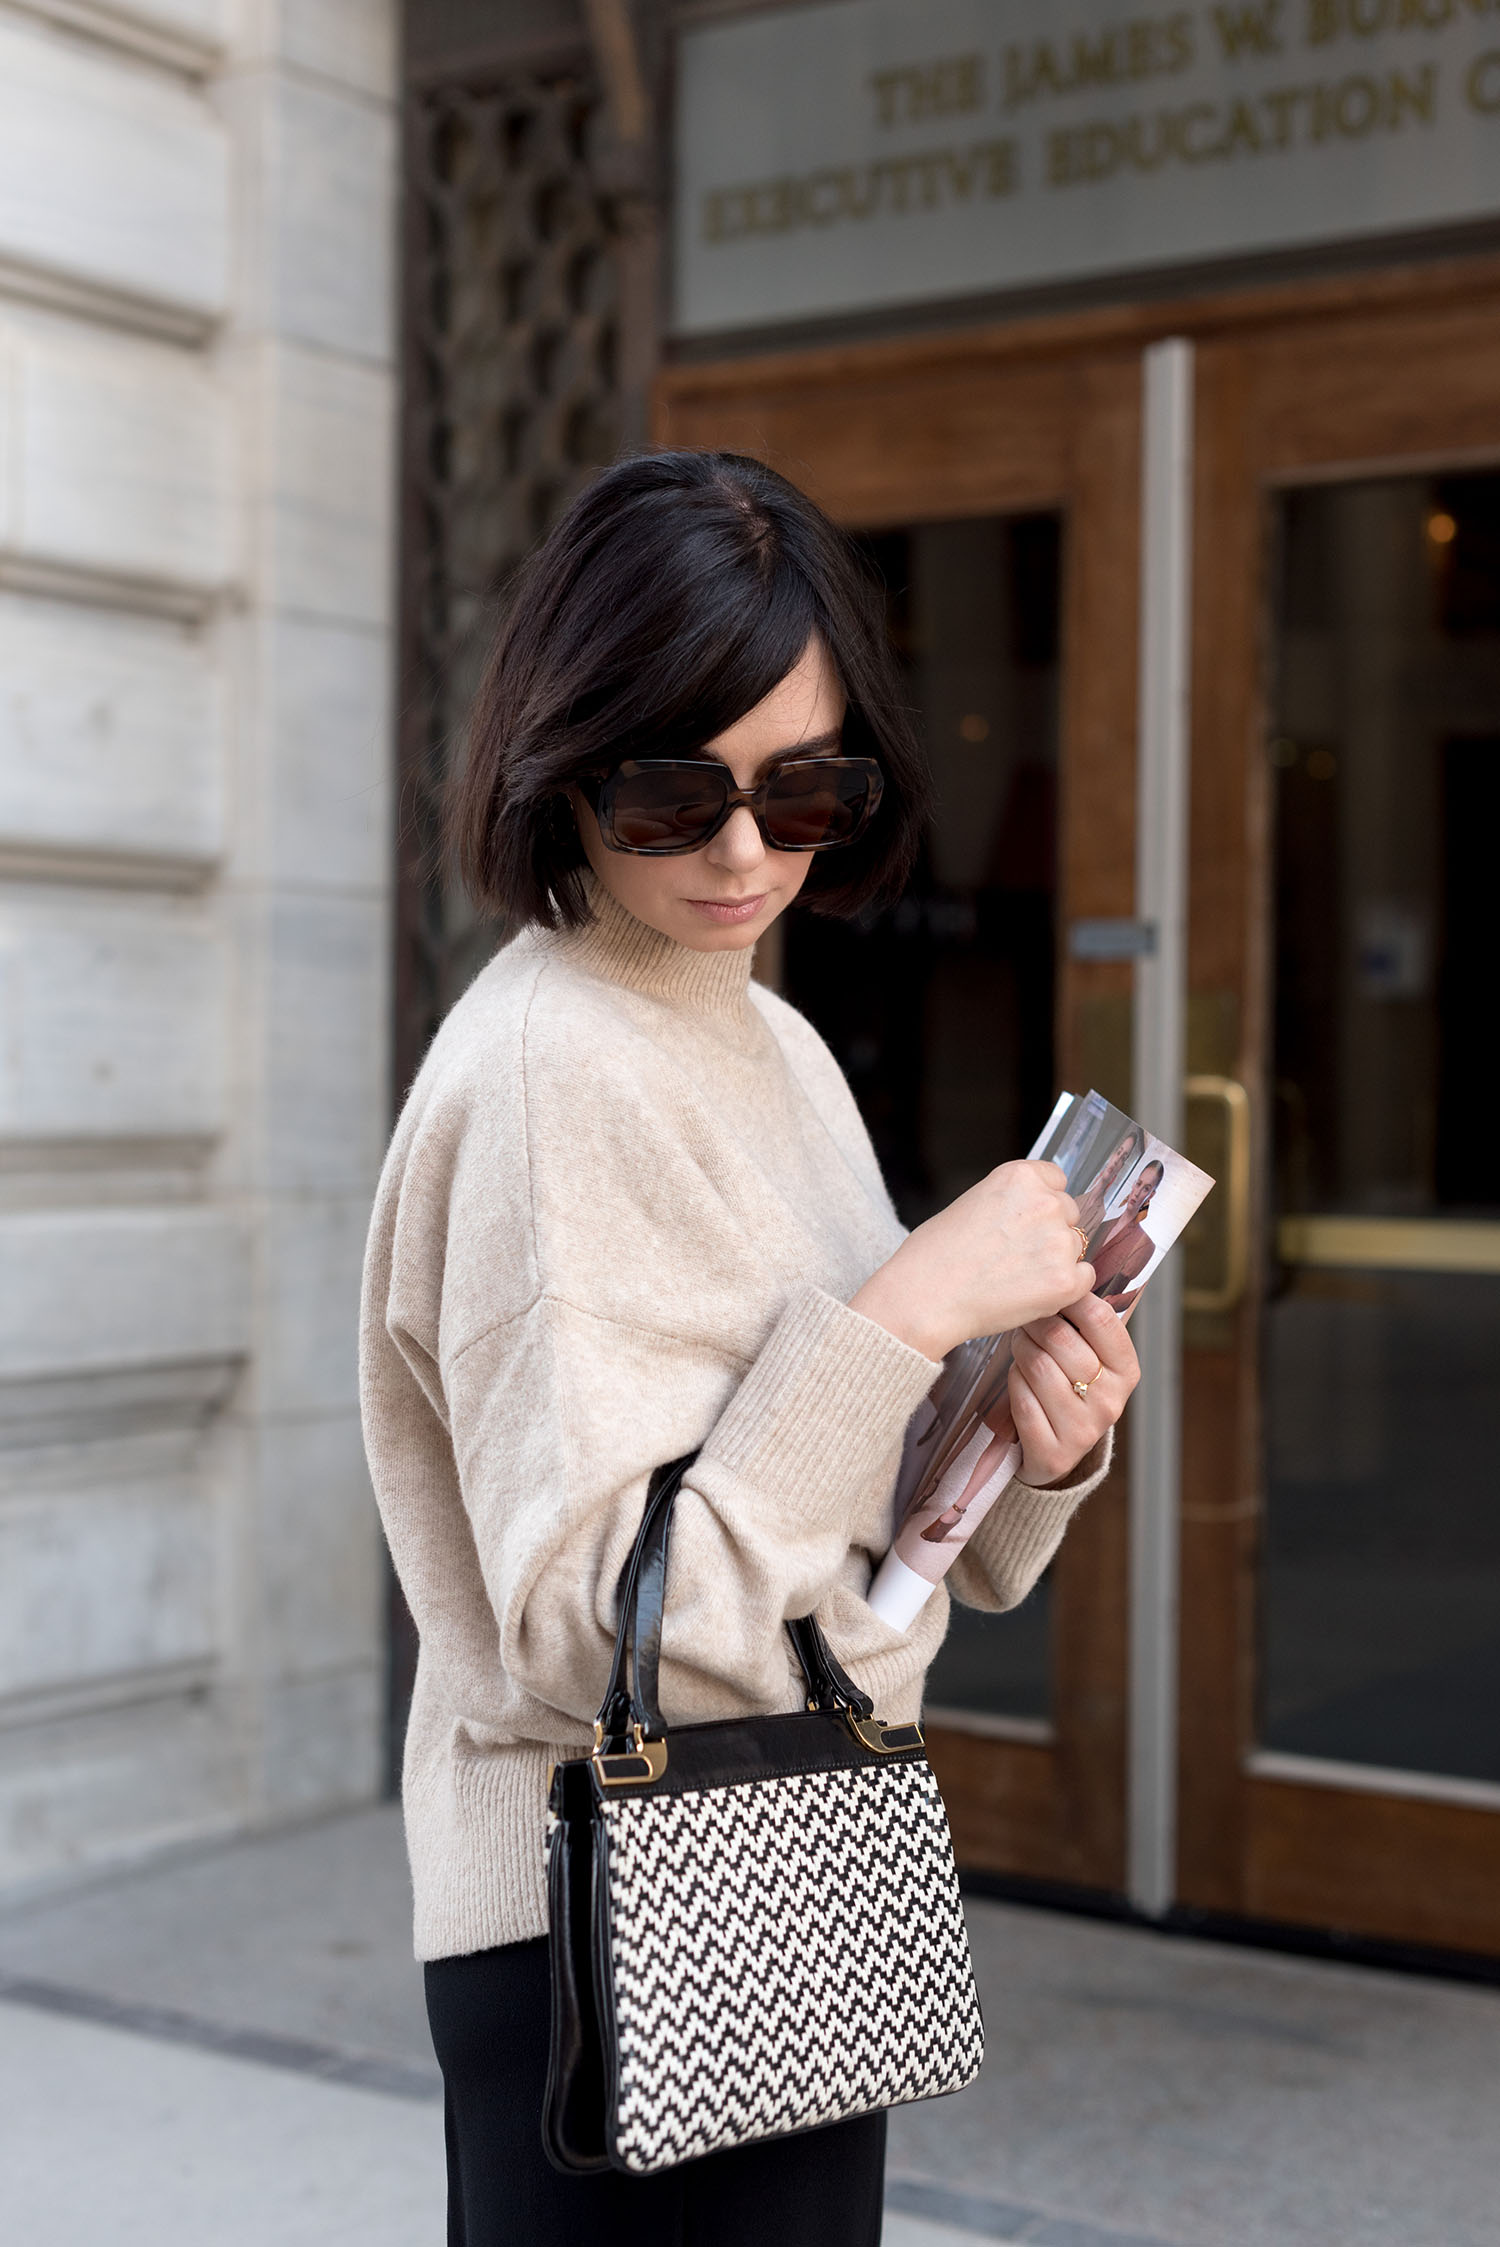 Portrait of top Canadian fashion blogger Cee Fardoe of Coco & Vera, holding a copy of Vogue magazine, wearing Mango sunglasses and carrying a vintage handbag